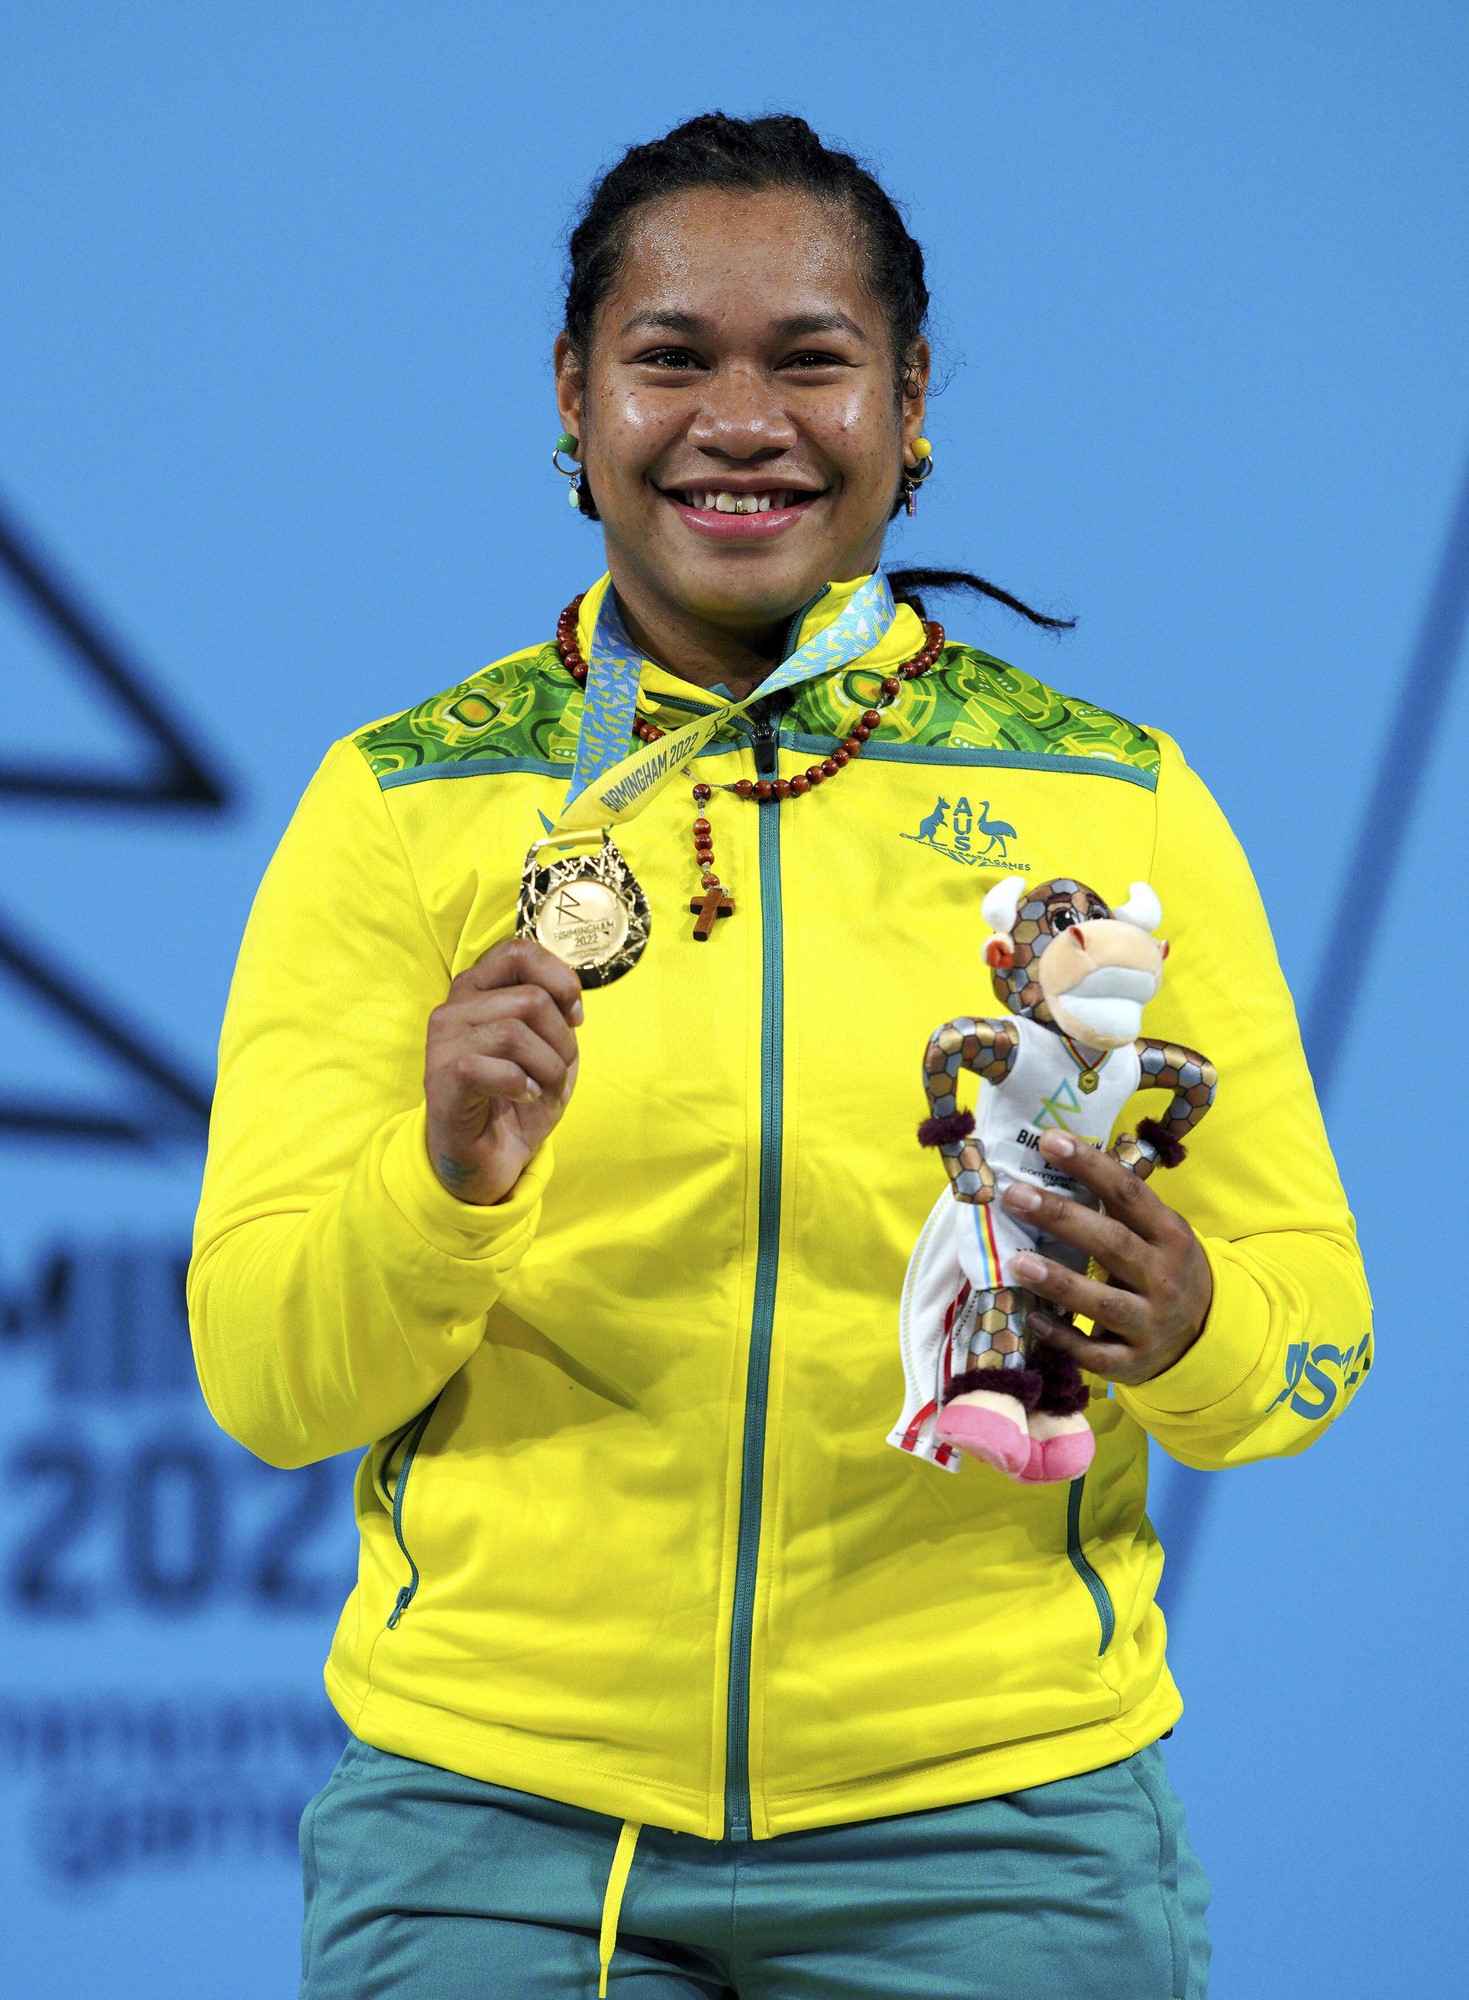 Eileen Cikamatana poses on podium with gold medal and small toy mascot